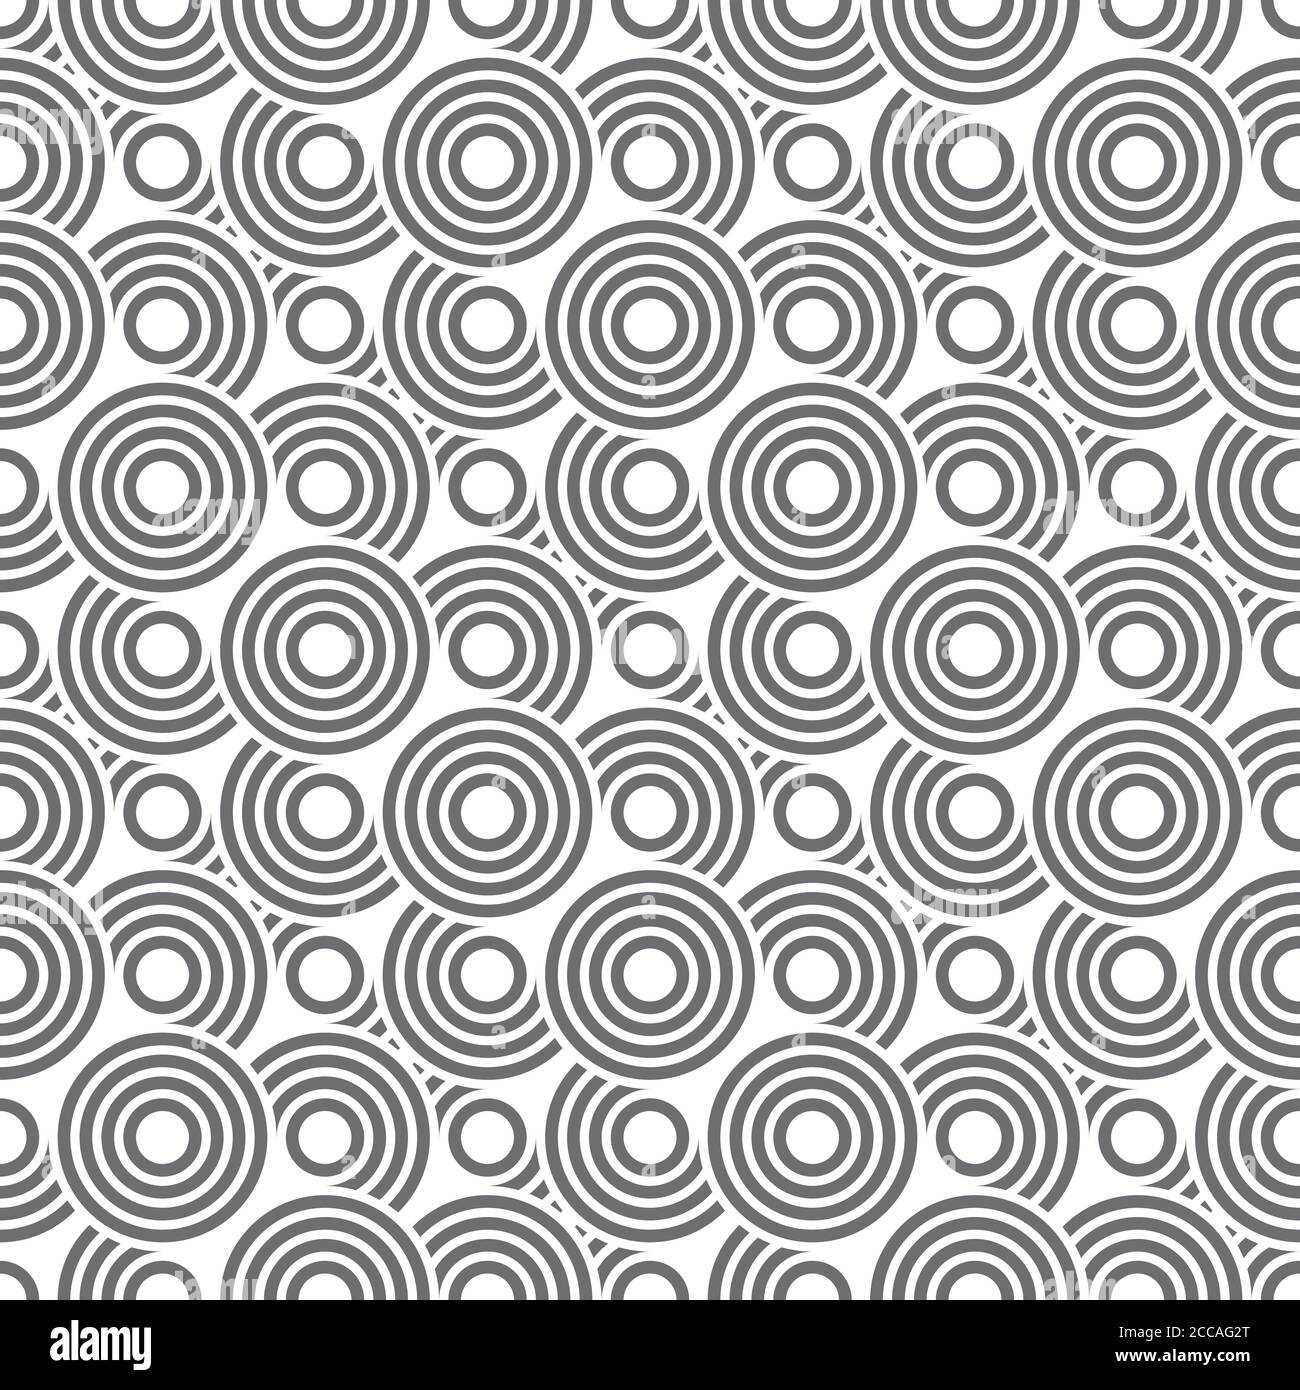 Vector art deco seamless pattern. Modern stylish texture with regularly repeating geometrical shapes, circles, semicircle, arcs and dots. Stock Vector